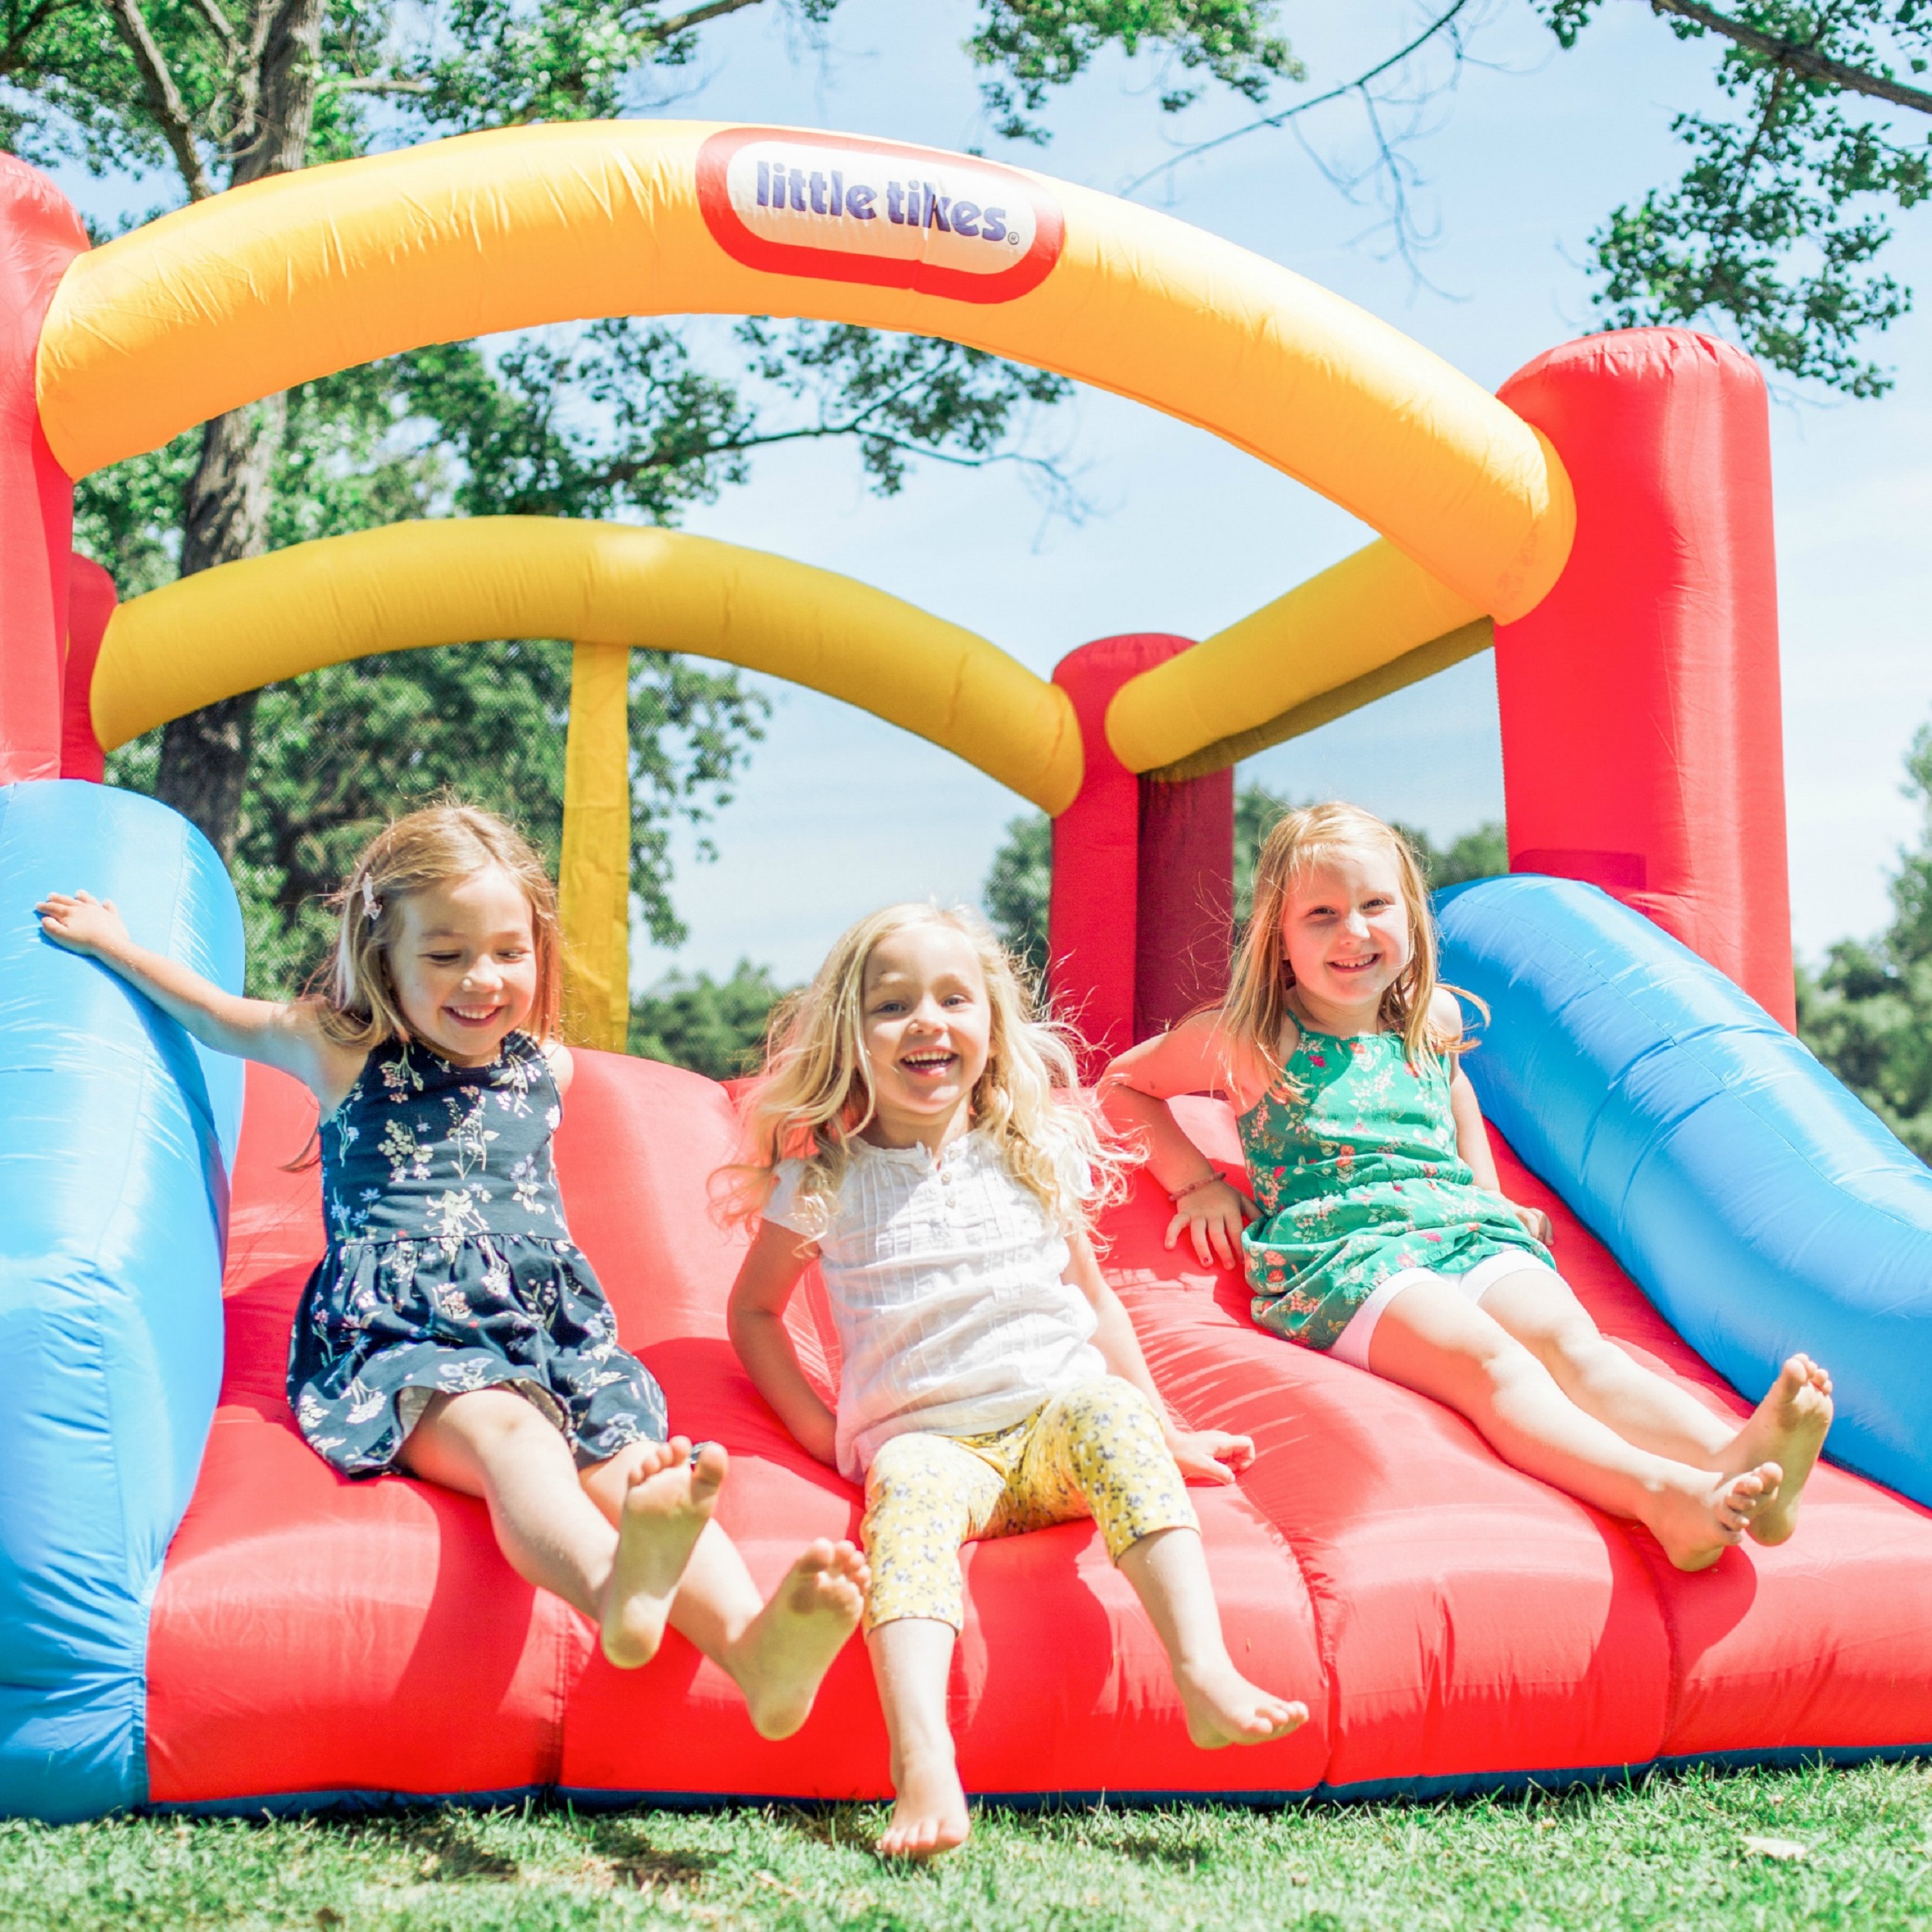 Little Tikes Jump 'n Slide 9'x12' Inflatable Bouncer, Inflatable Bounce House with Slide and Blower, Multicolor- Indoor Outdoor Toy for Kids Girls Boys Ages 3 4 5+ - image 4 of 7